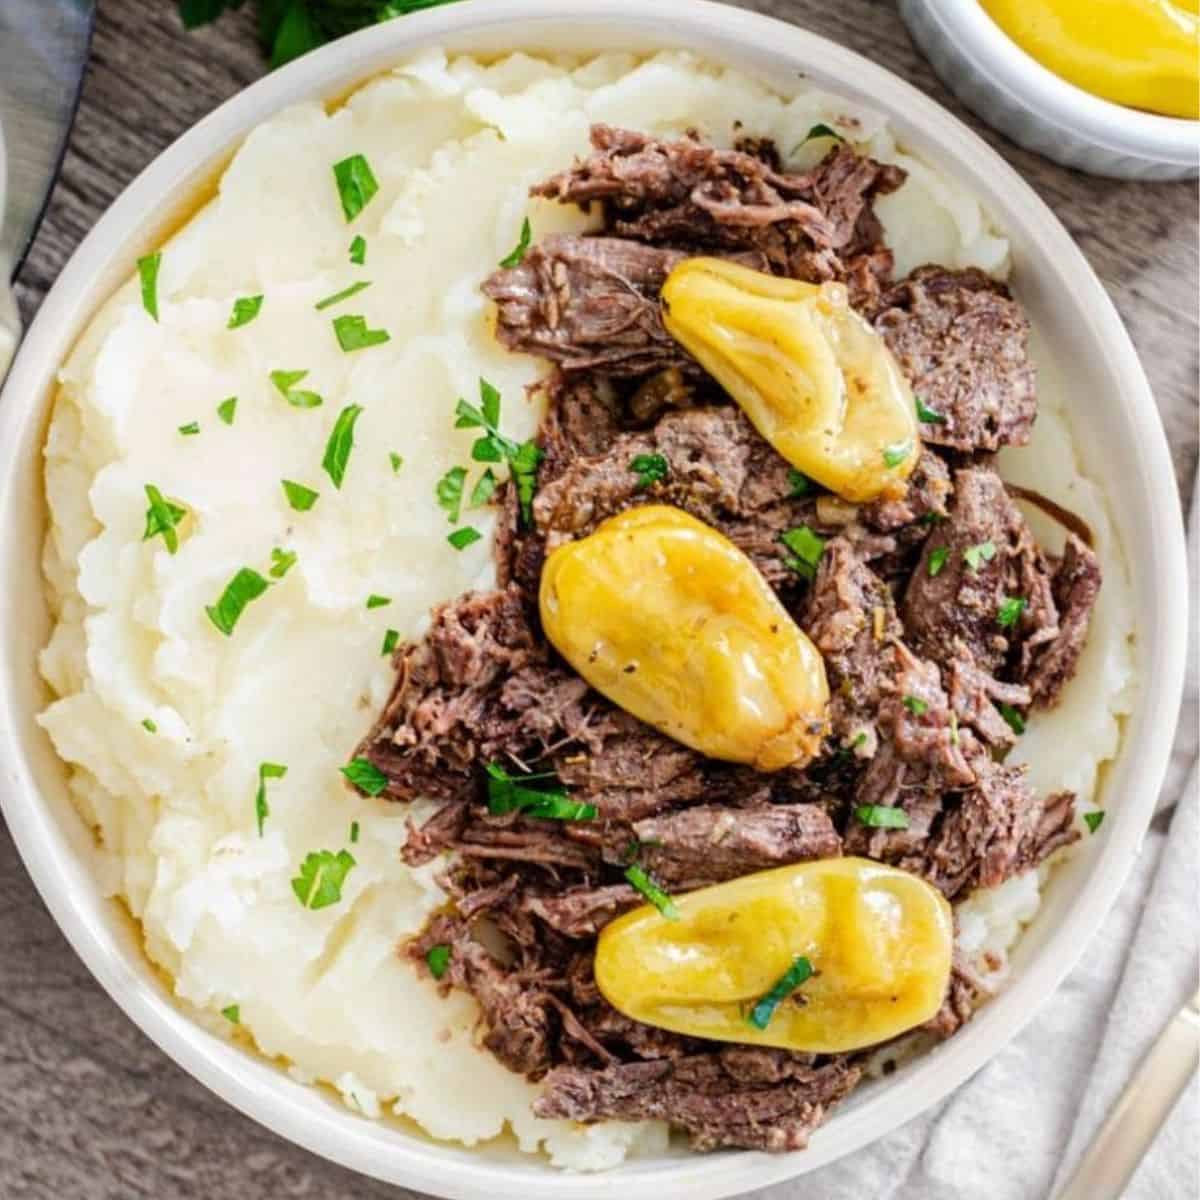 Instant Pot Mississippi Roast - Easy Peasy Meals